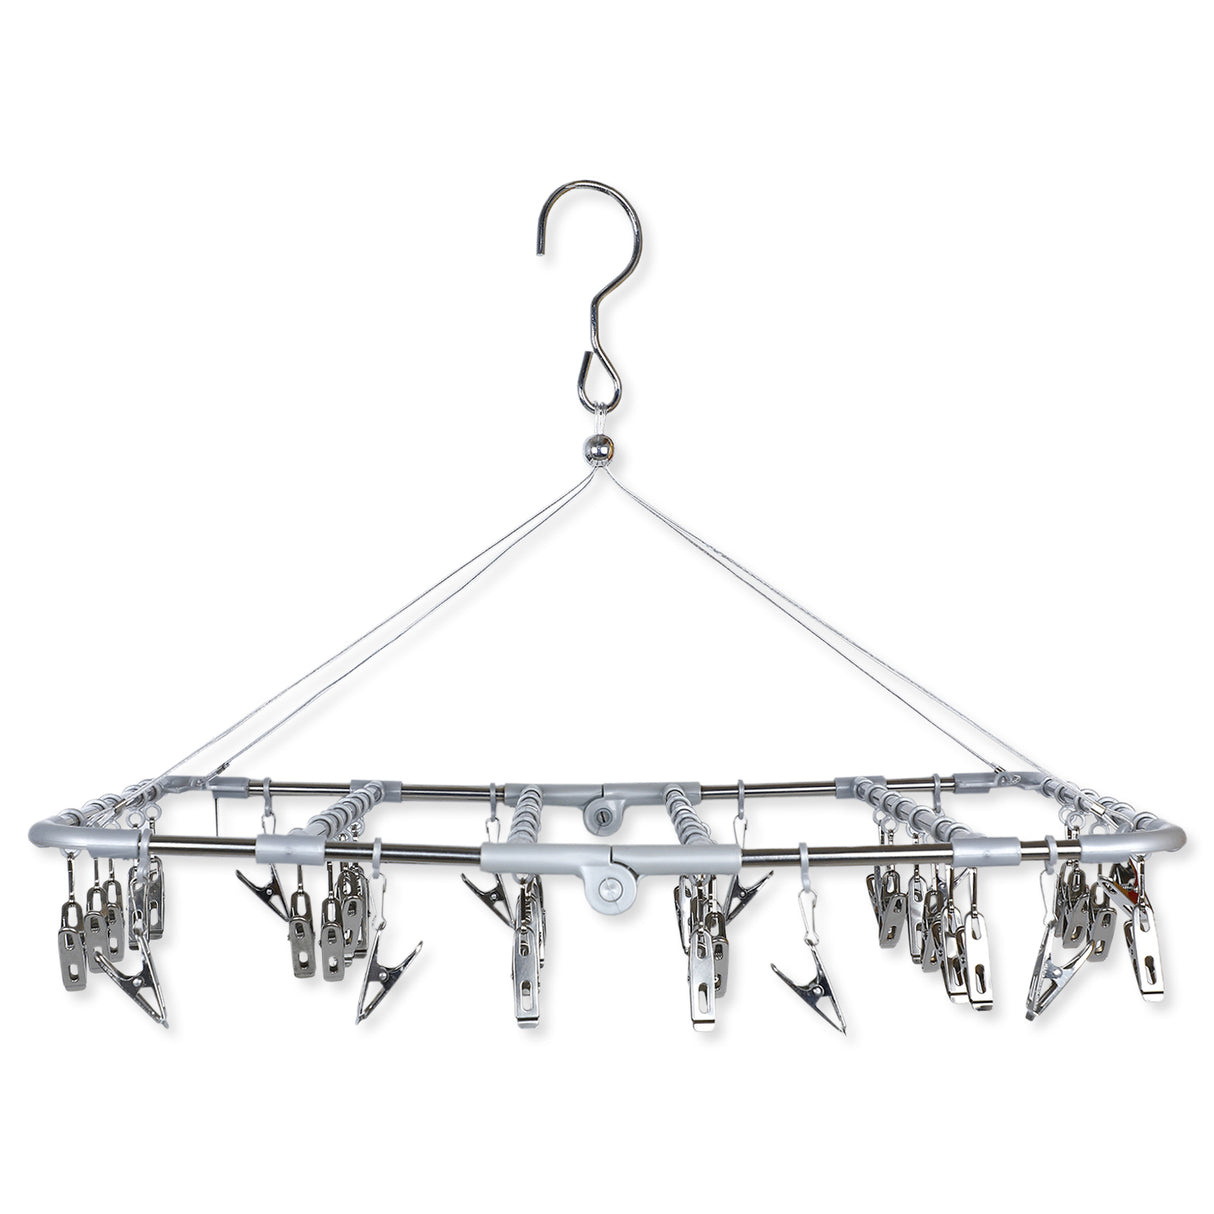 Hanging And Foldable Clothes Drying Multi-Clip Baby Hanger